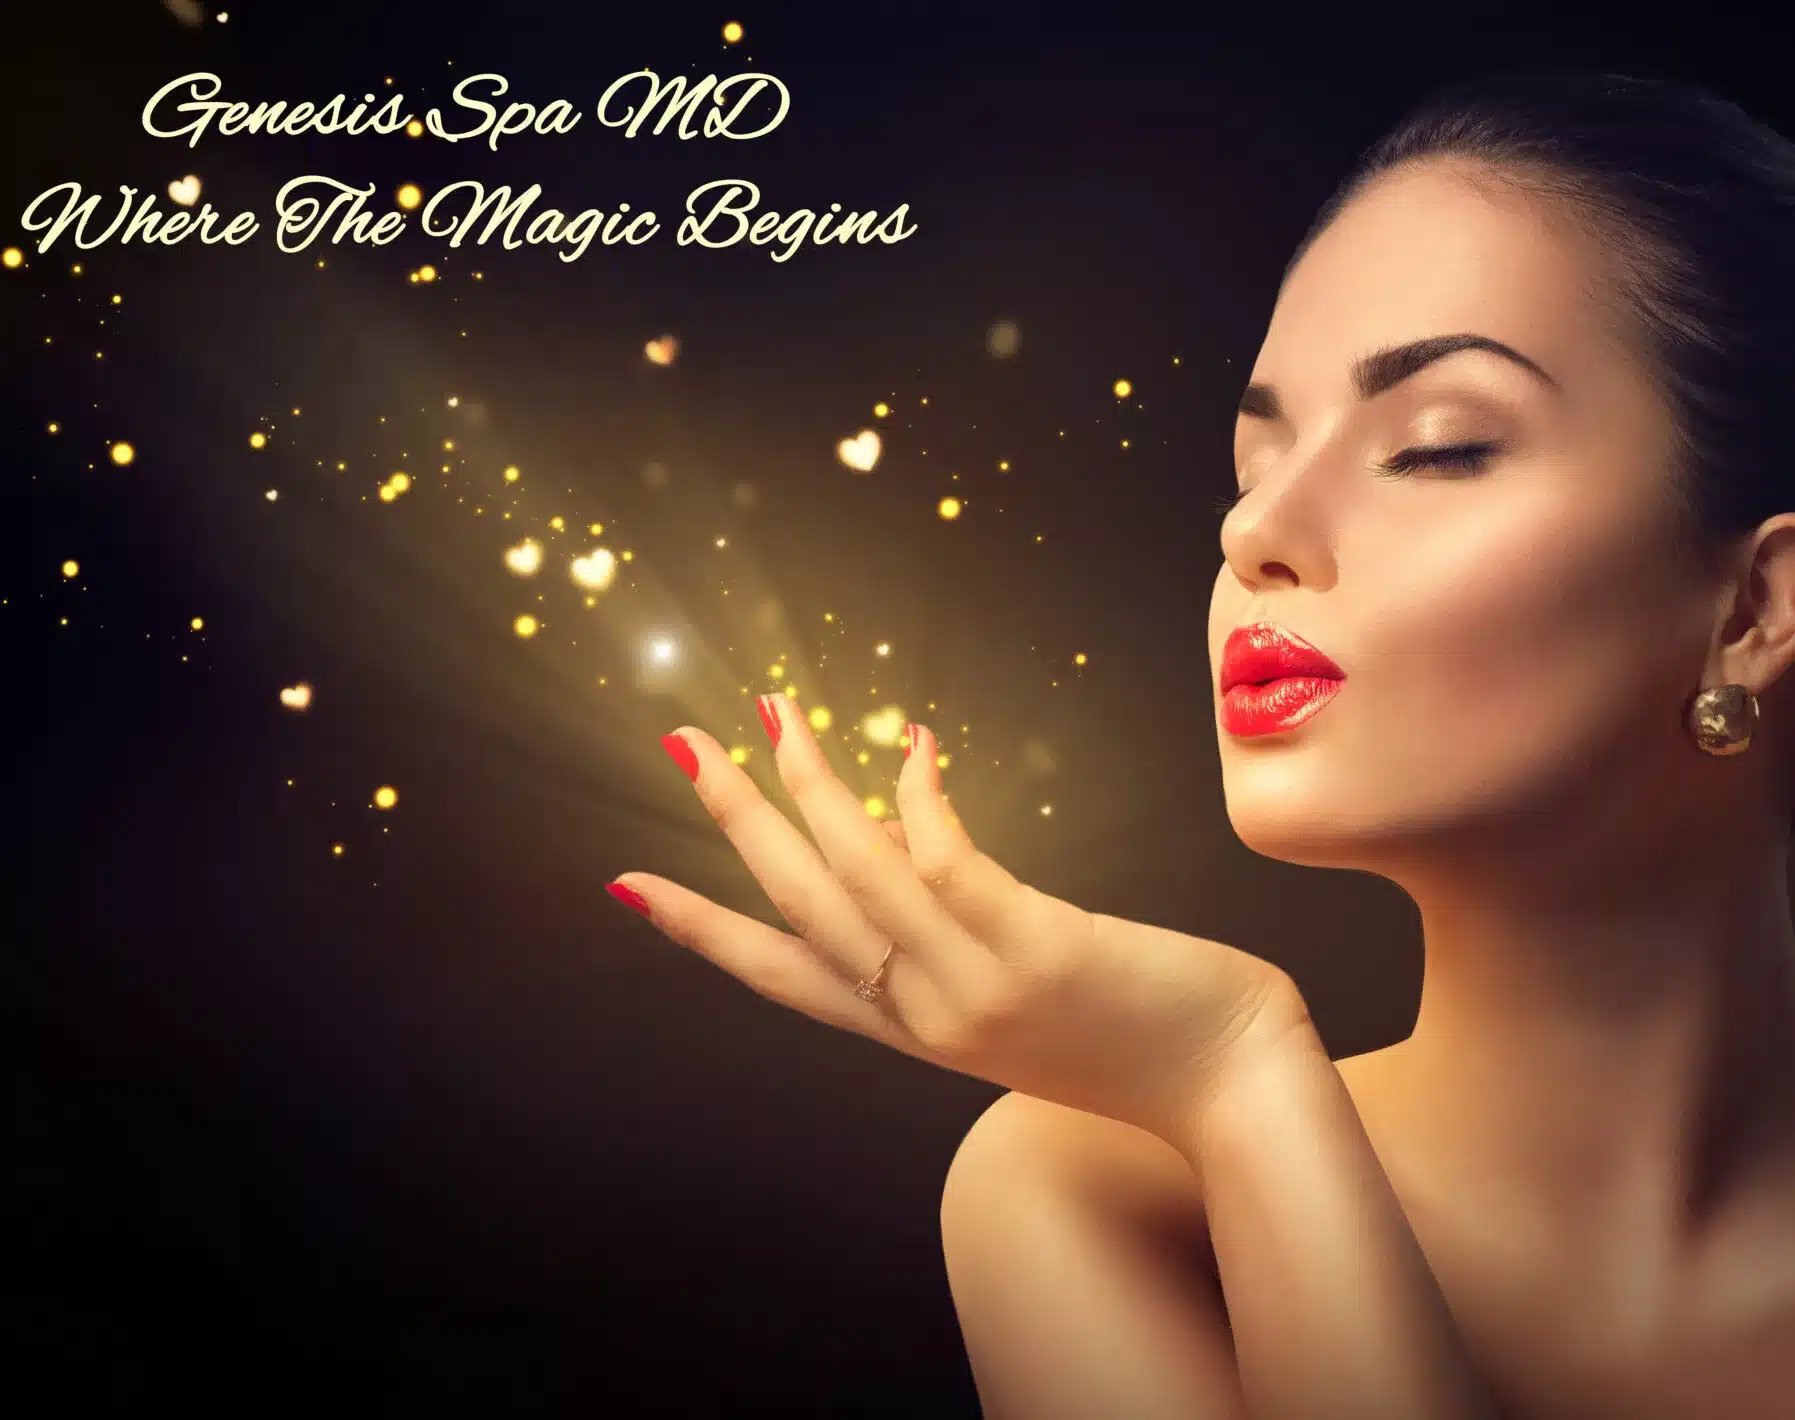 Genesis Spa MD, Medical Spa, Safe and effective treatment at Genesis Spa MD, IV Therapy, Hydration Therapy, Drip Therapy, IV, Drip, Hydration, RF Microneedling, Microneedling, Rejuvenate, Rejuvenation